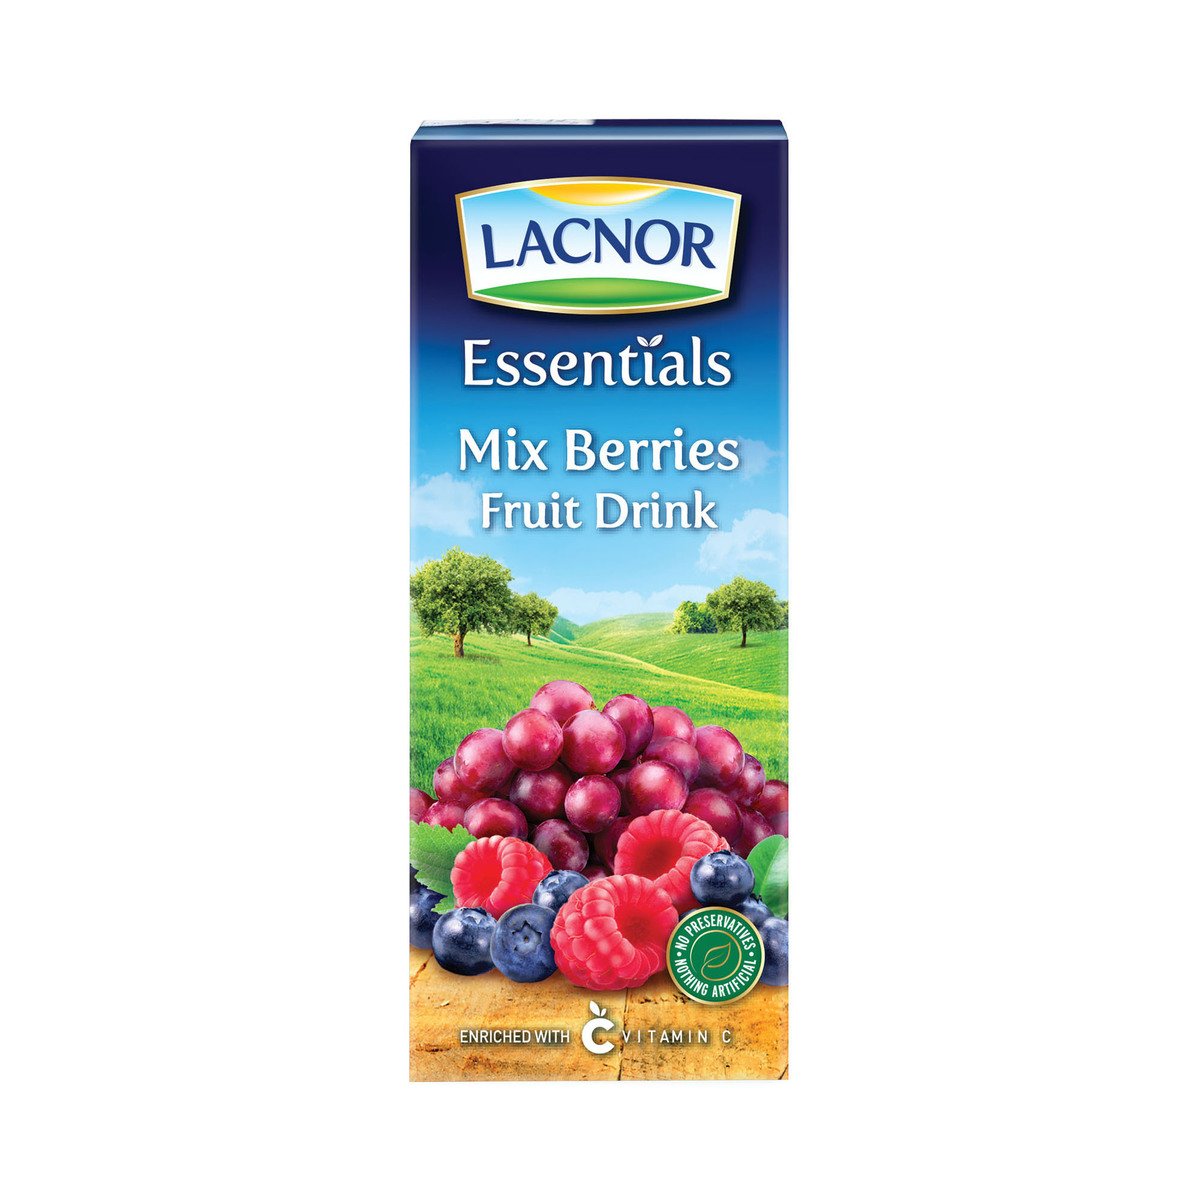 Lacnor Essentials Mixed Berries Fruit Drink 8 x 180 ml